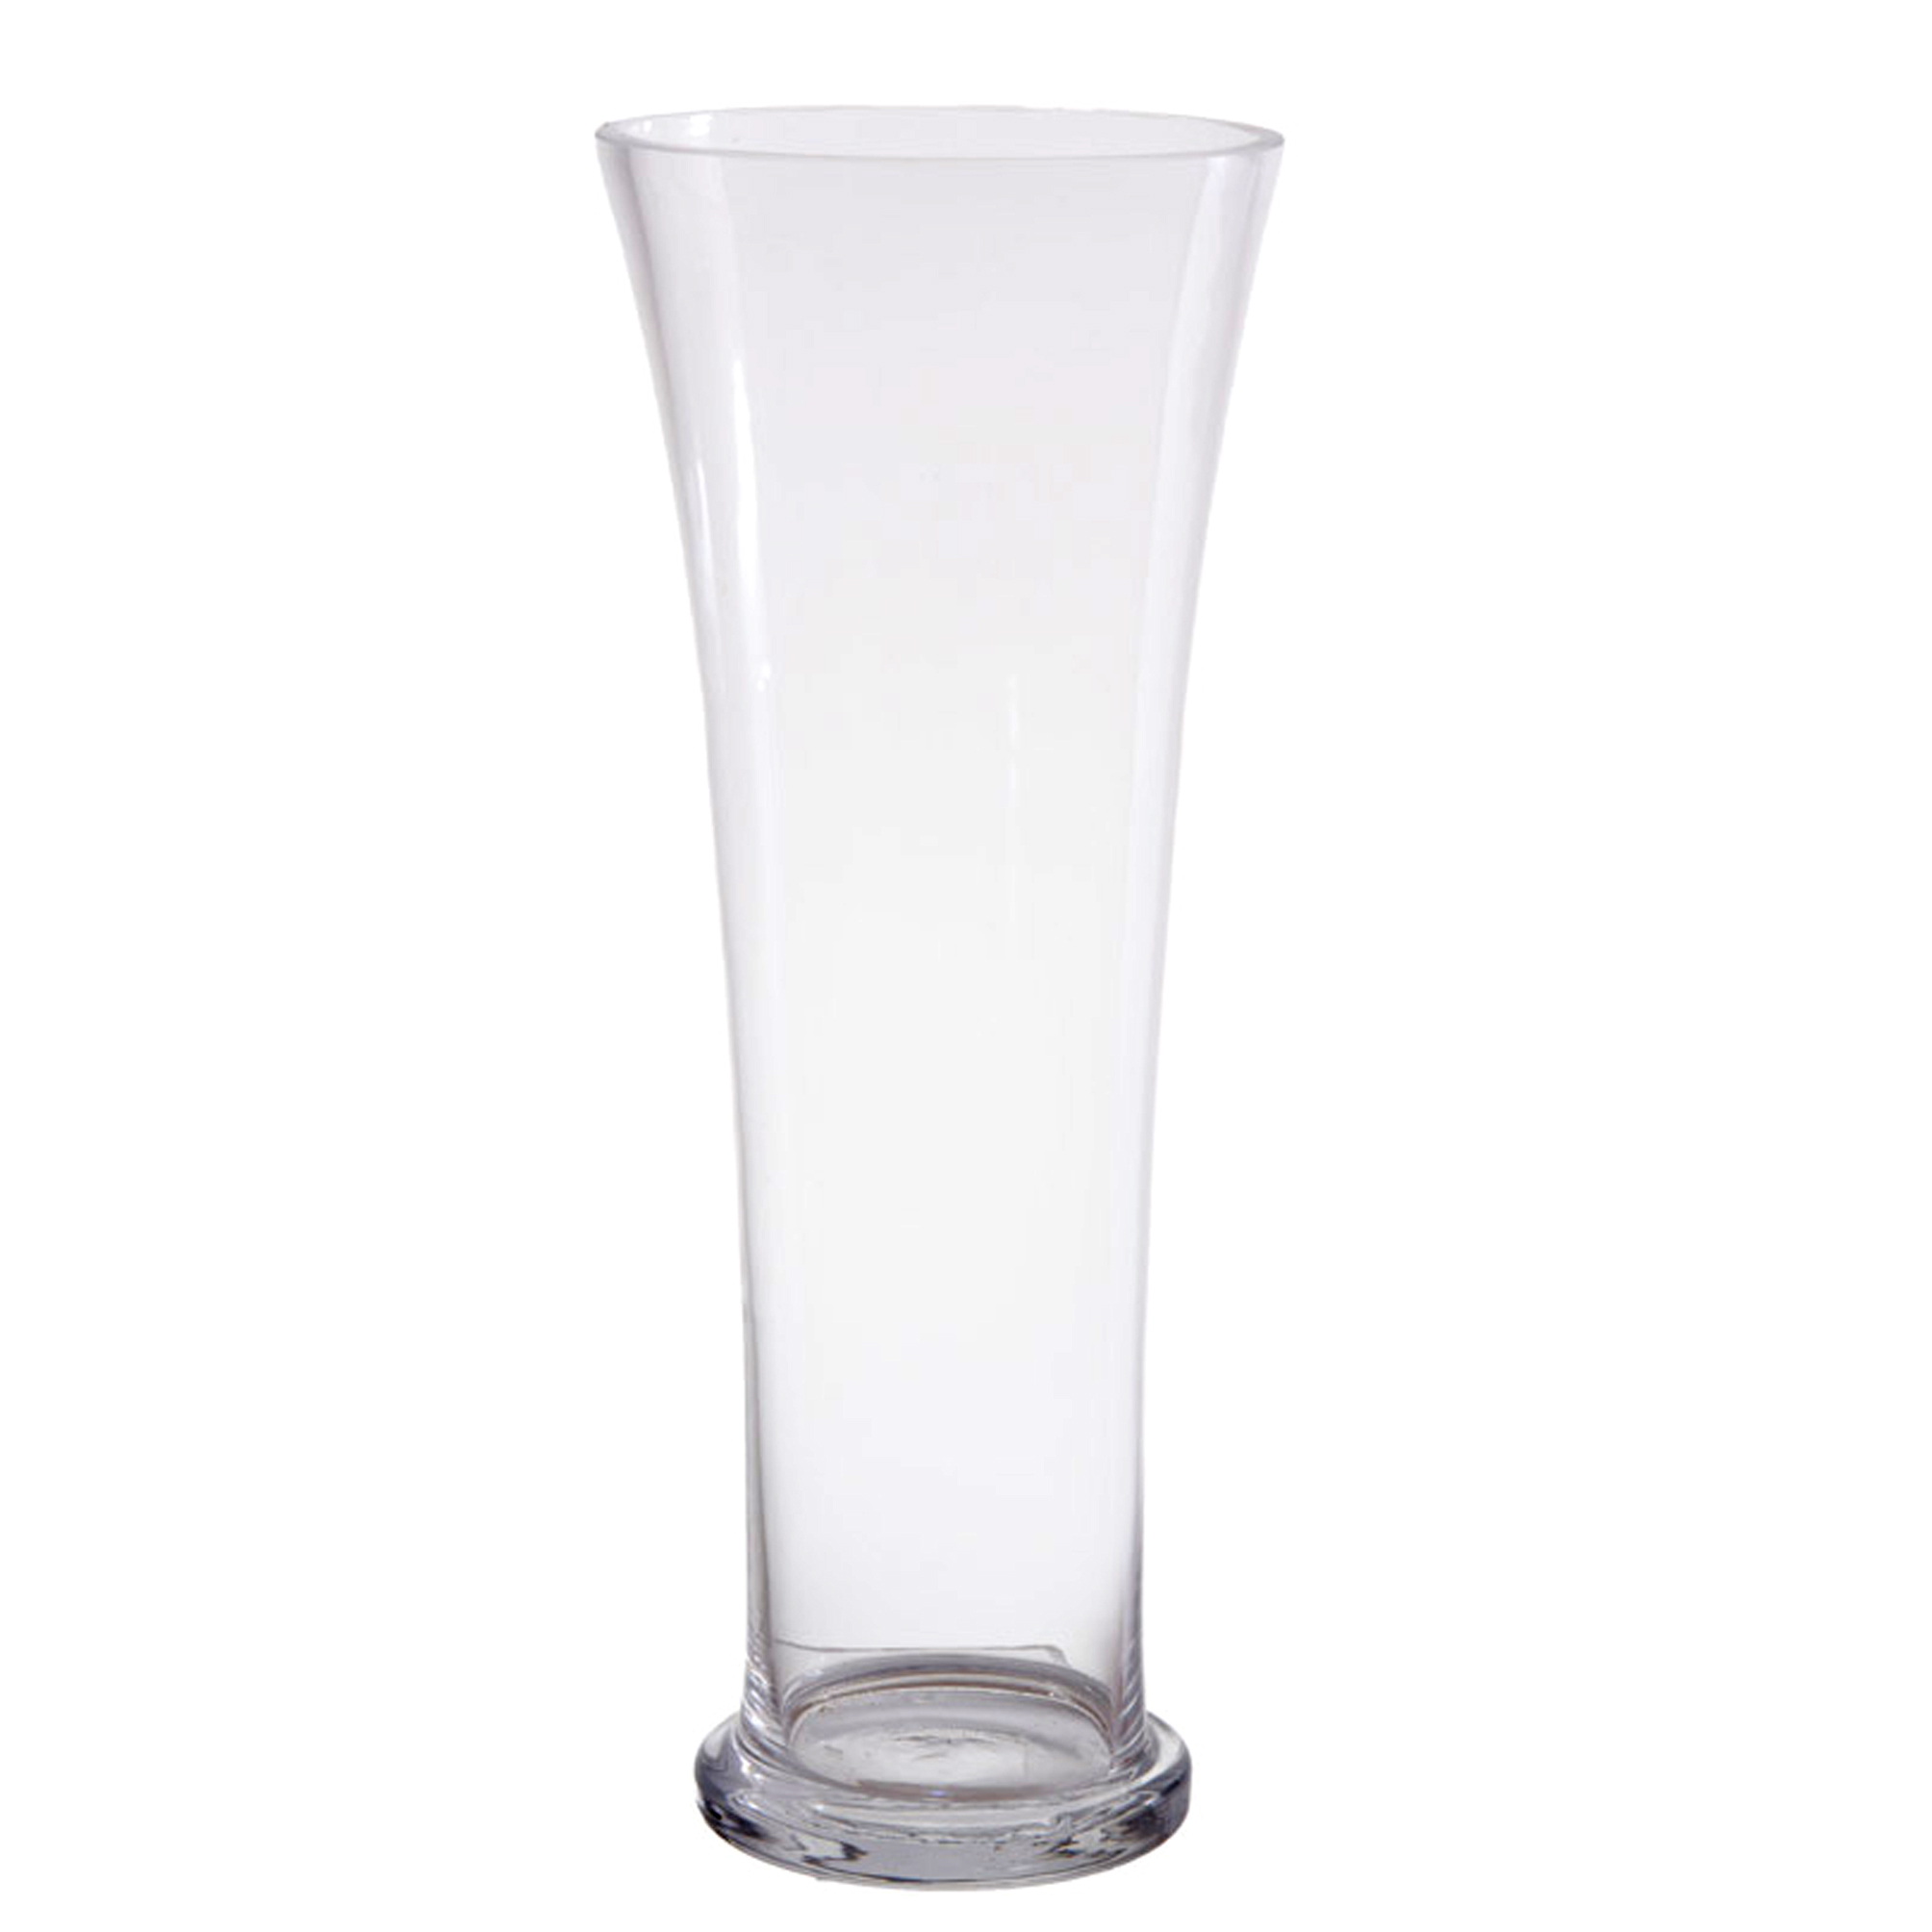 Home decors and accessories, GLASS VASES, VASO FORMA APERTA D.13,8XH,35 CM